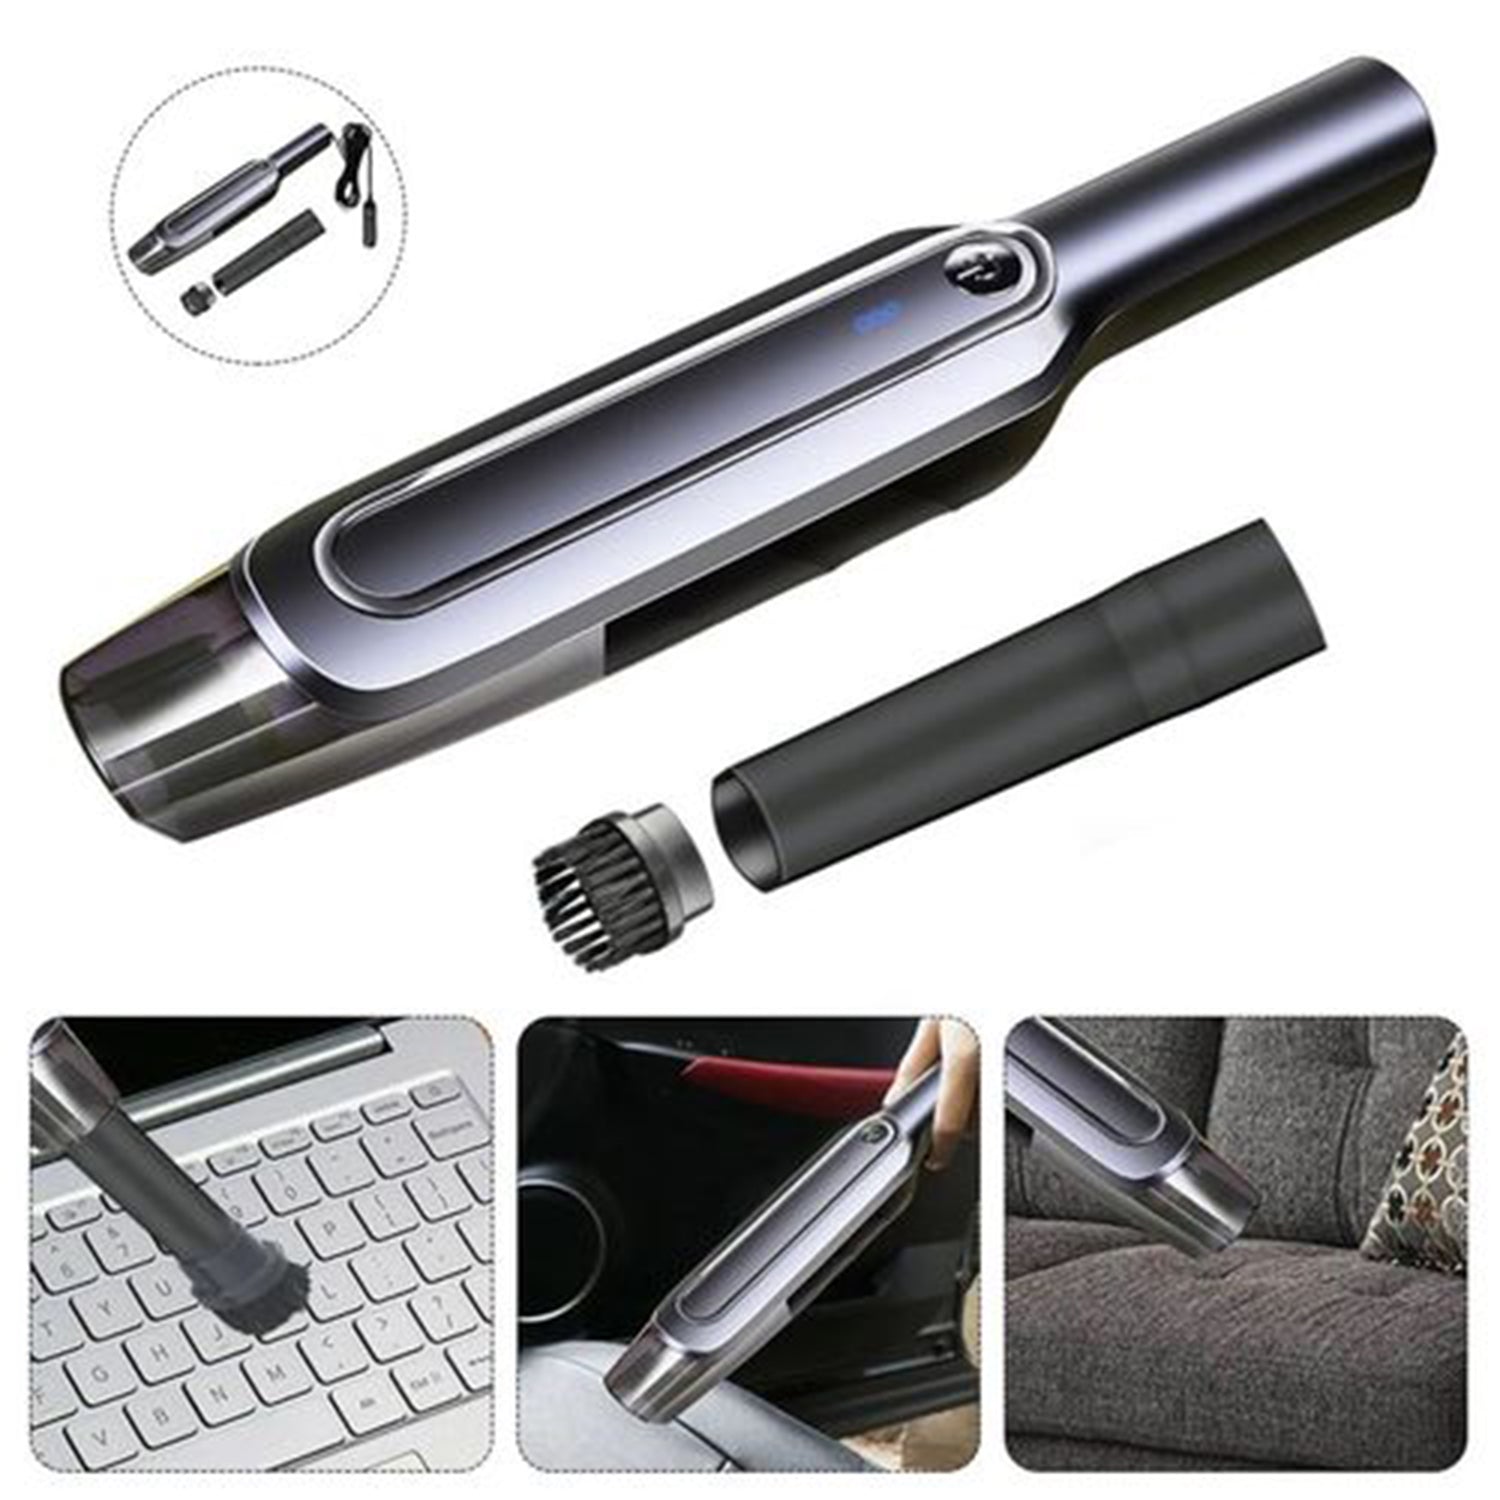 6325 Portable Vacuum Cleaner Wireless USB High Power Strong Suction Handheld Vacuum Cleaner for Home Cars 